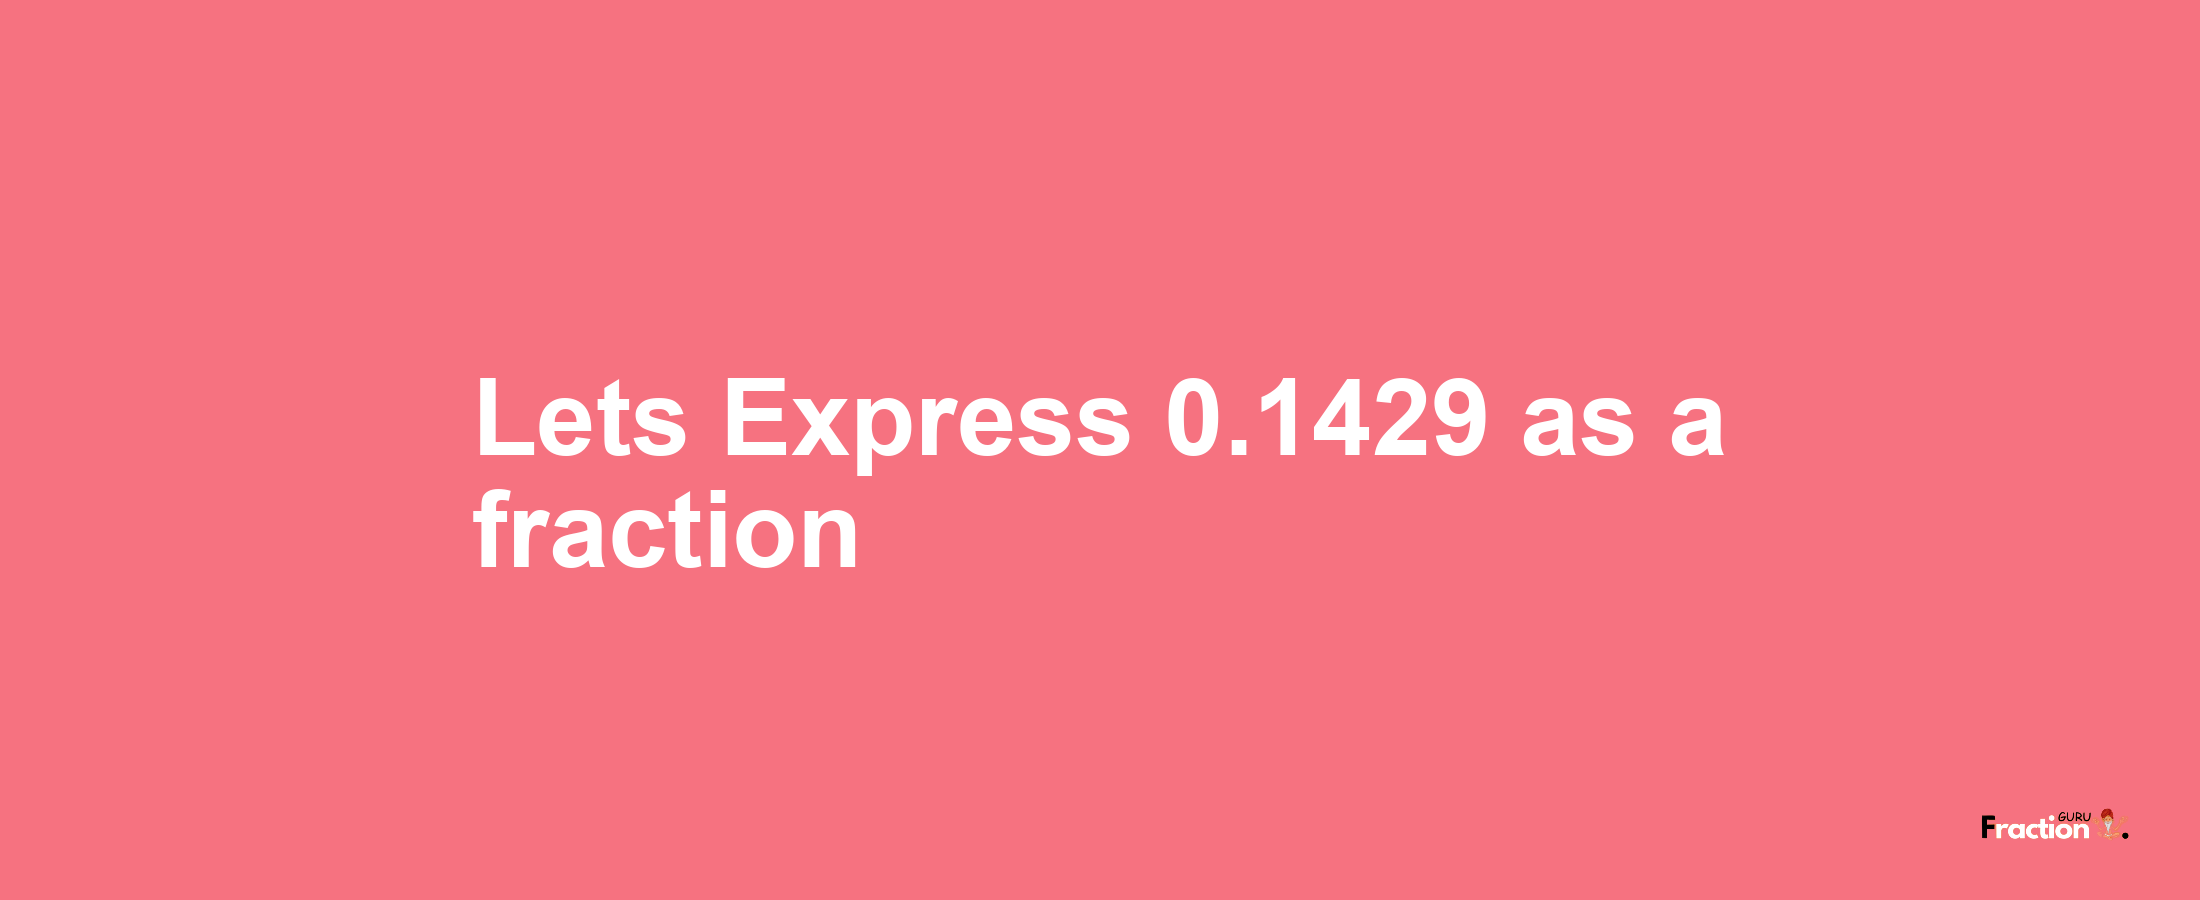 Lets Express 0.1429 as afraction